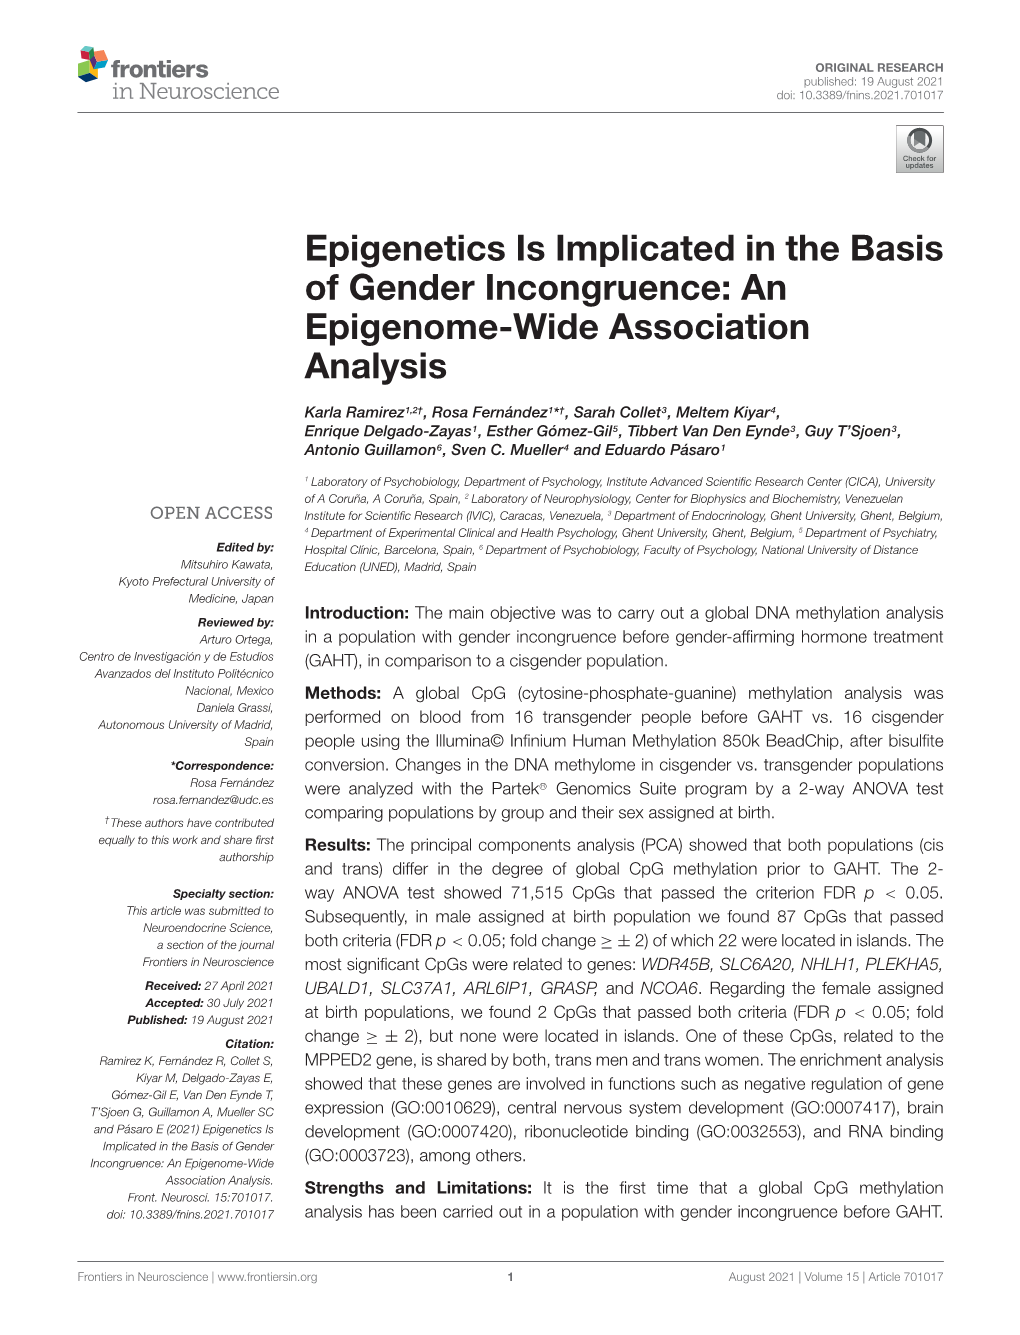 Epigenetics Is Implicated in the Basis of Gender Incongruence: an Epigenome-Wide Association Analysis